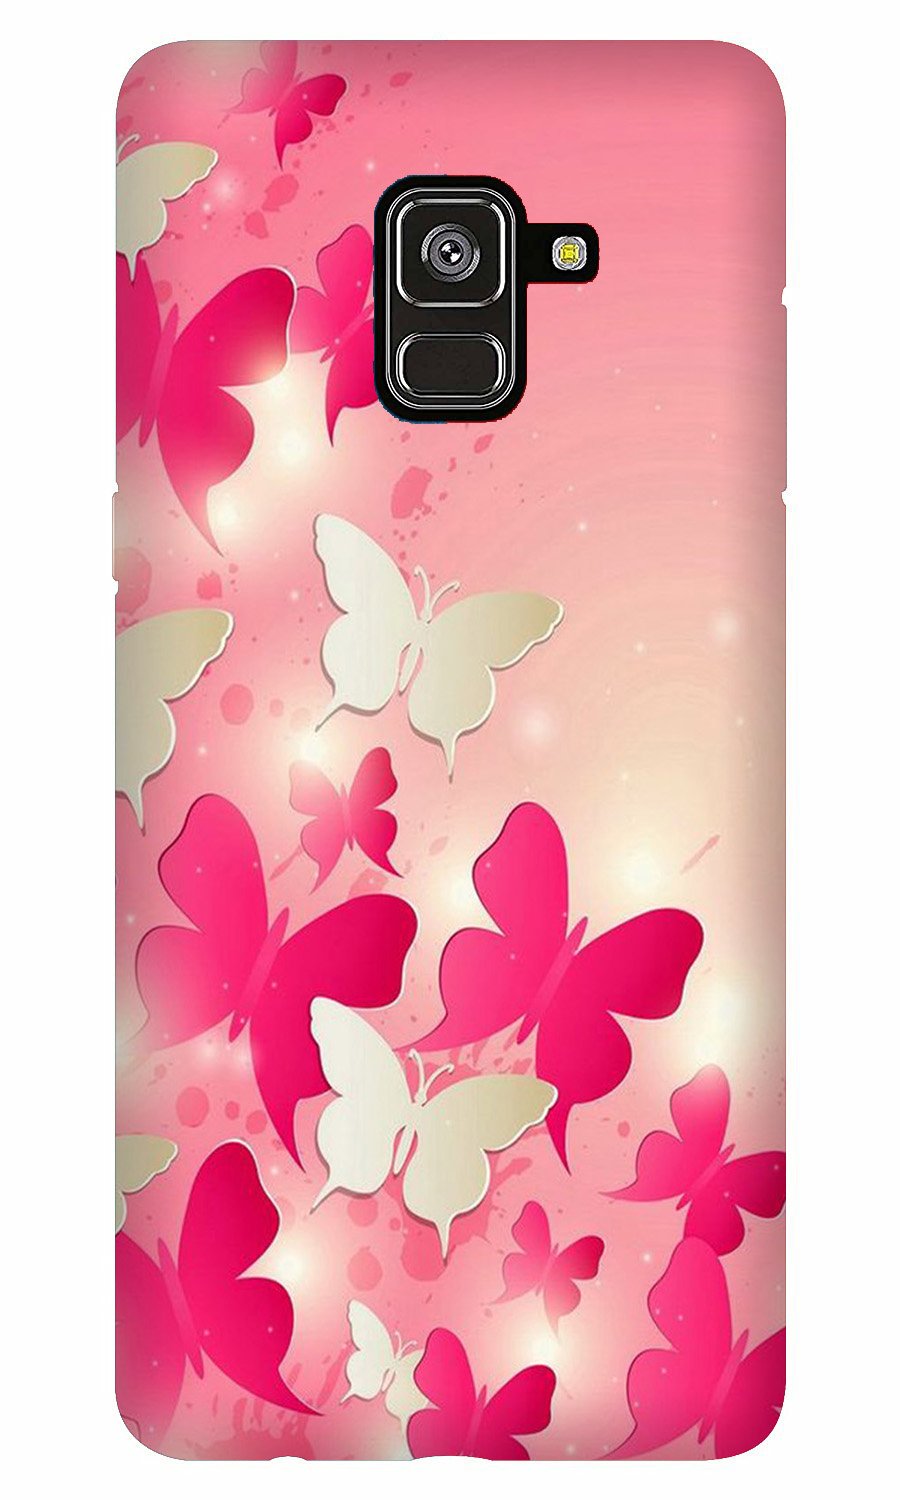 White Pick Butterflies Case for Galaxy A5 (2018)